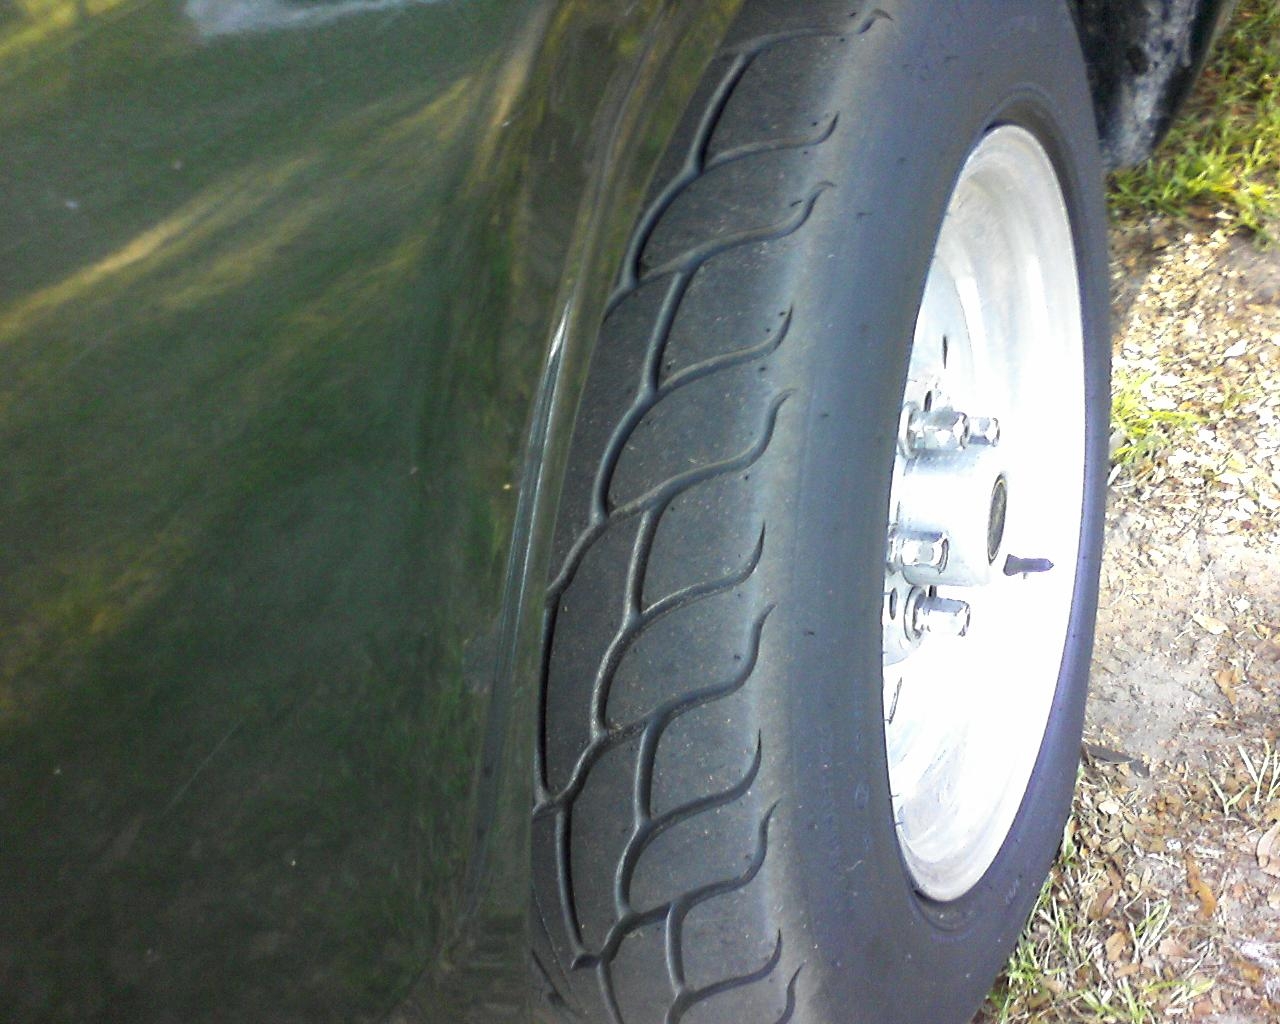 Attached picture 5224209-Tires2.JPG